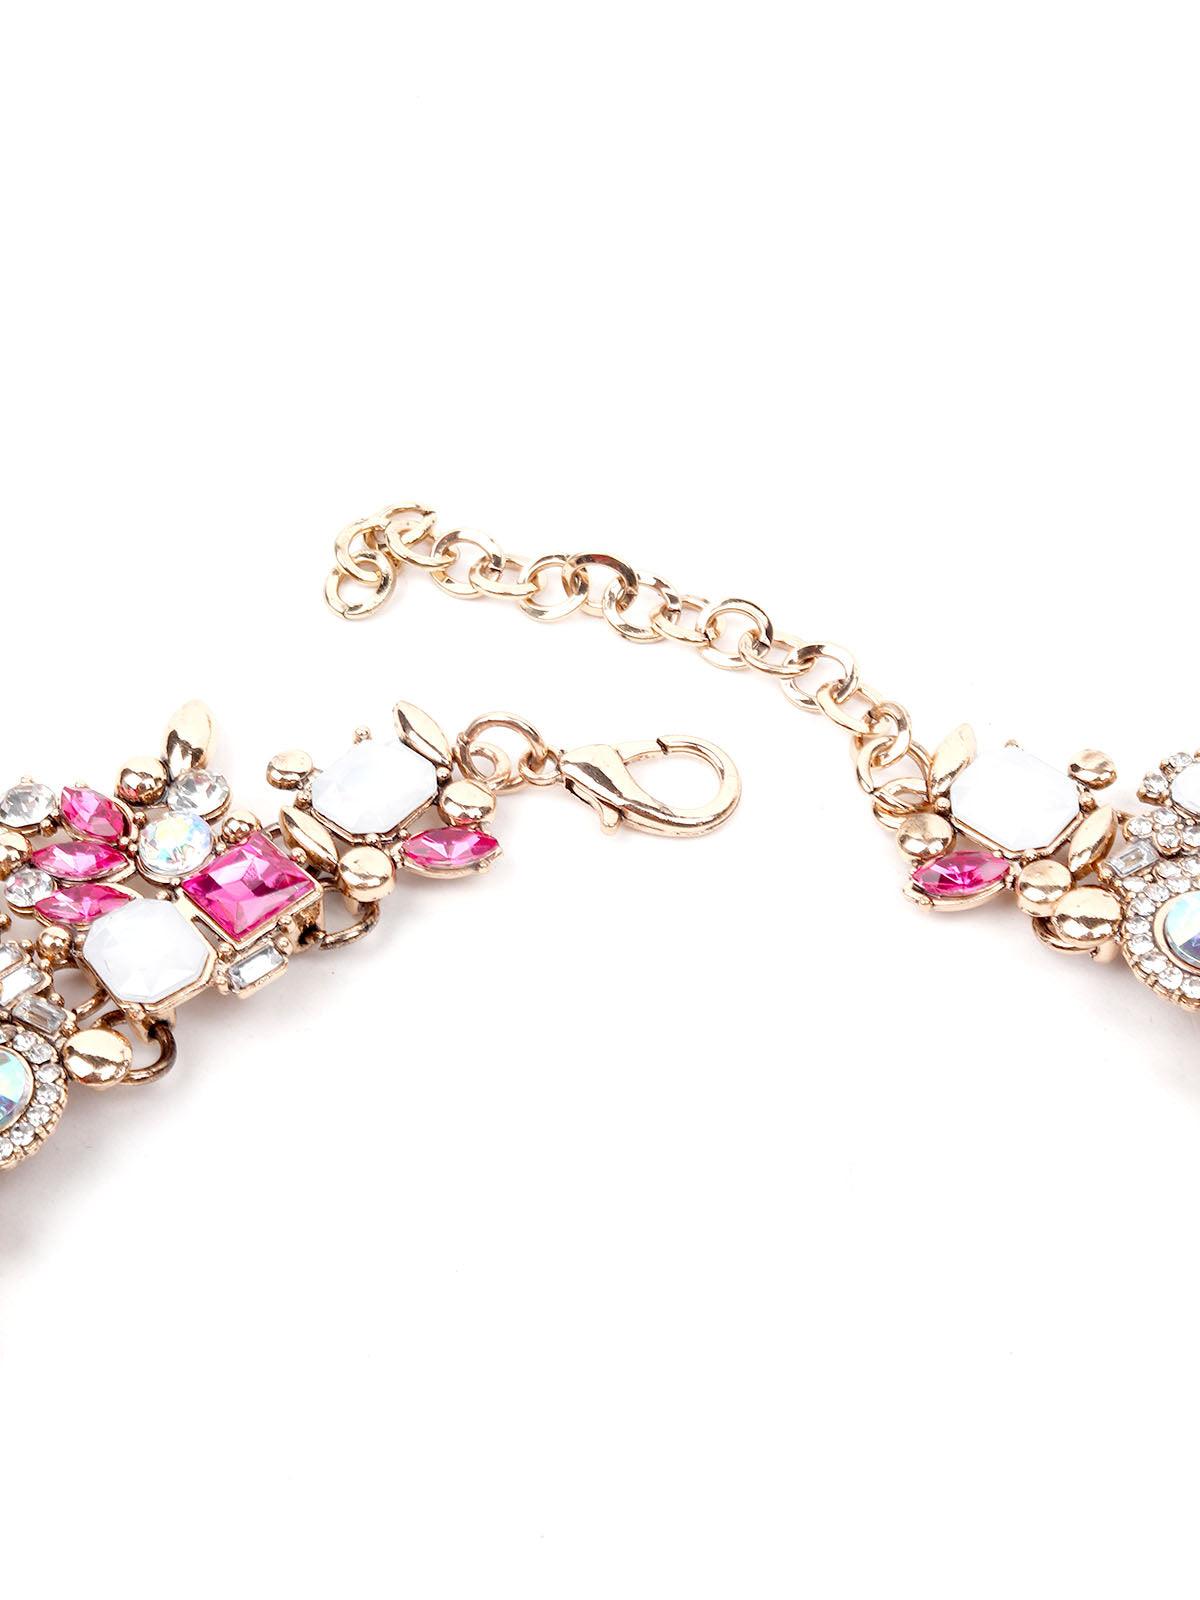 Women's Pink And White Embellished Gorgeous Necklace Set - Odette